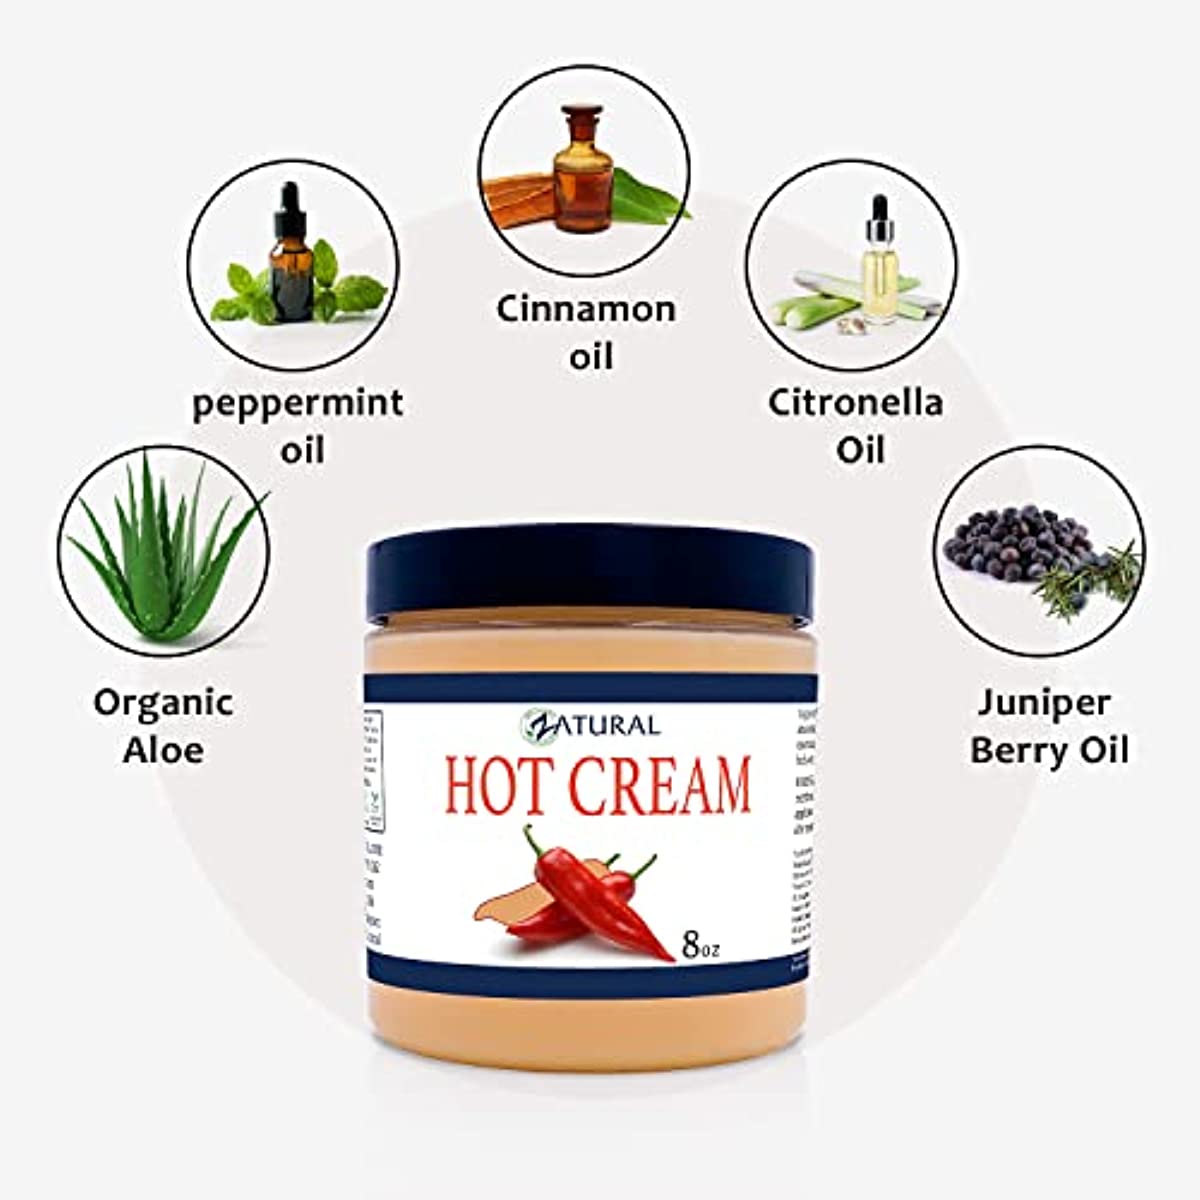 Organic Hot Cream-Cellulite Cream-Muscle Rub-Slimming Cream-Pain Relief-Body Wraps-Belly Fat-Skin Firming & Weight Loss-Professional Therapeutic Grade-Doctor Formulated (8 Ounce)